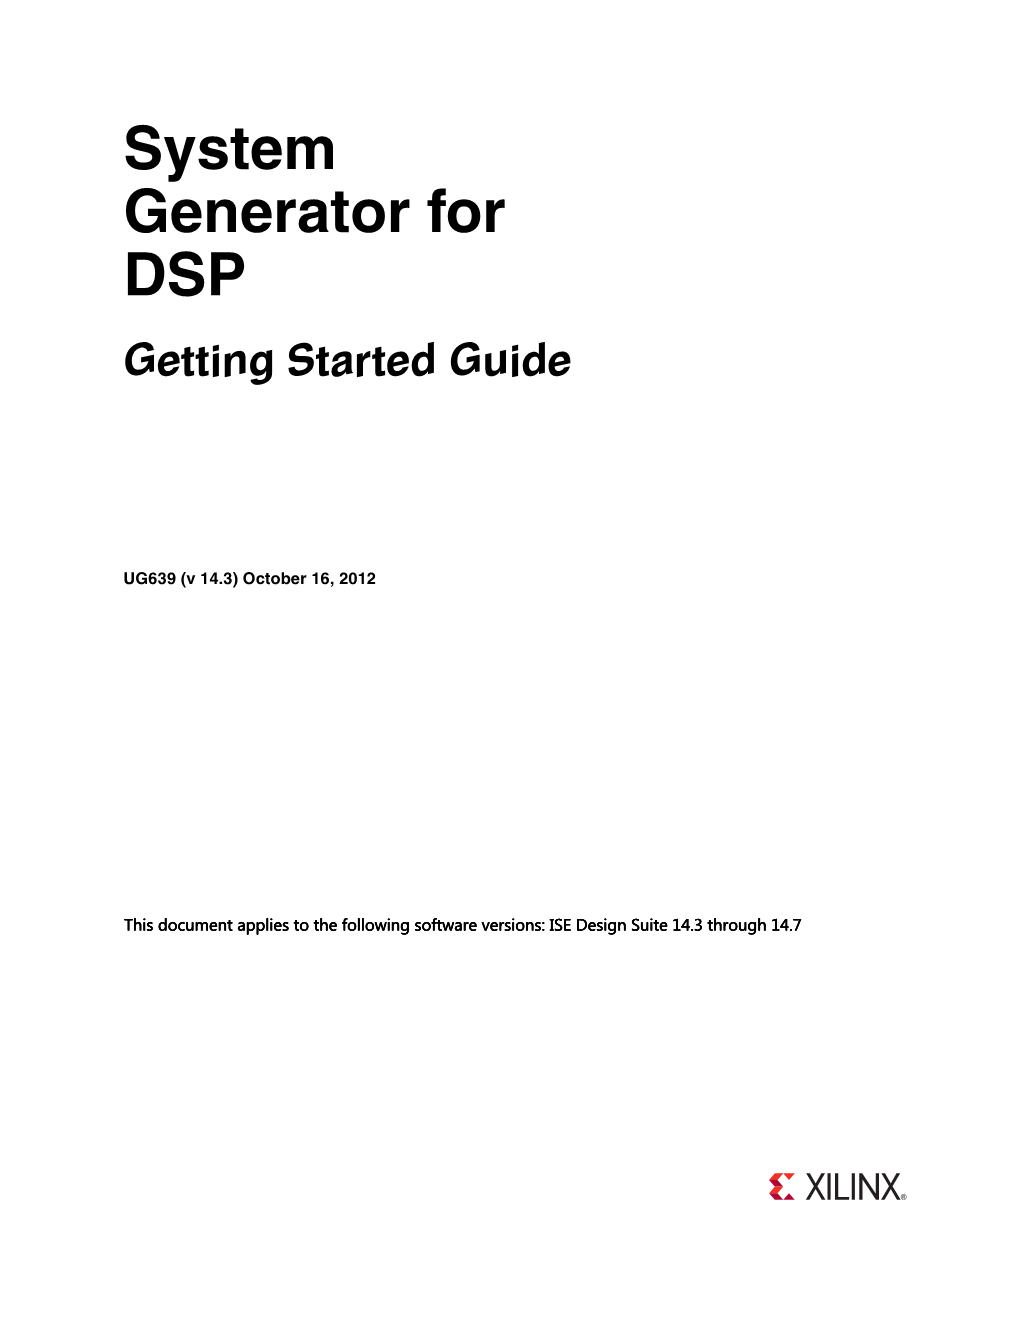 System Generator for DSP (Getting Started Guide)